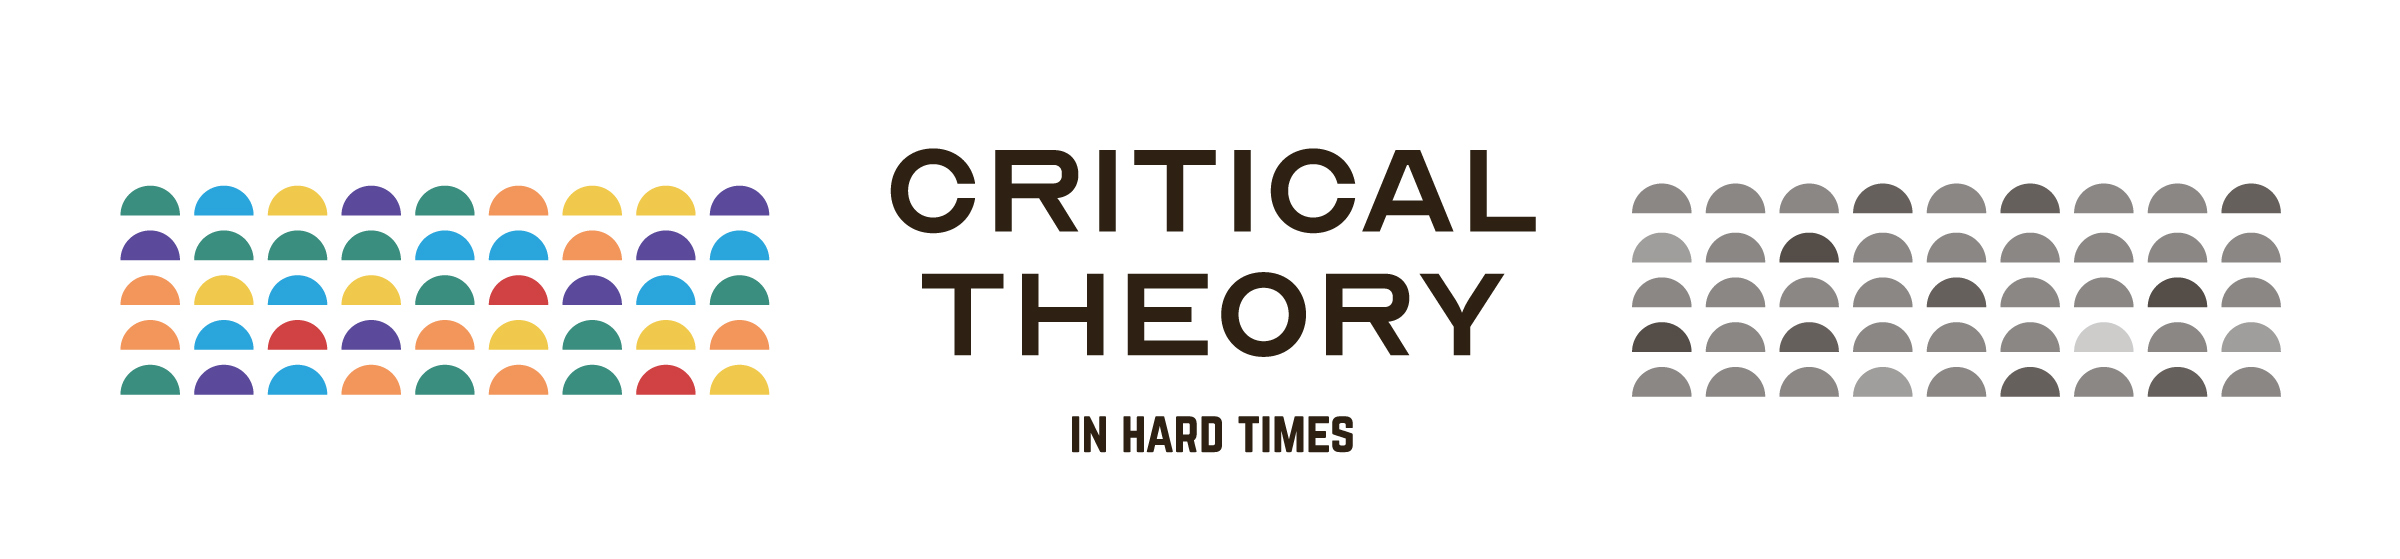 Critical Theory in Hard Times